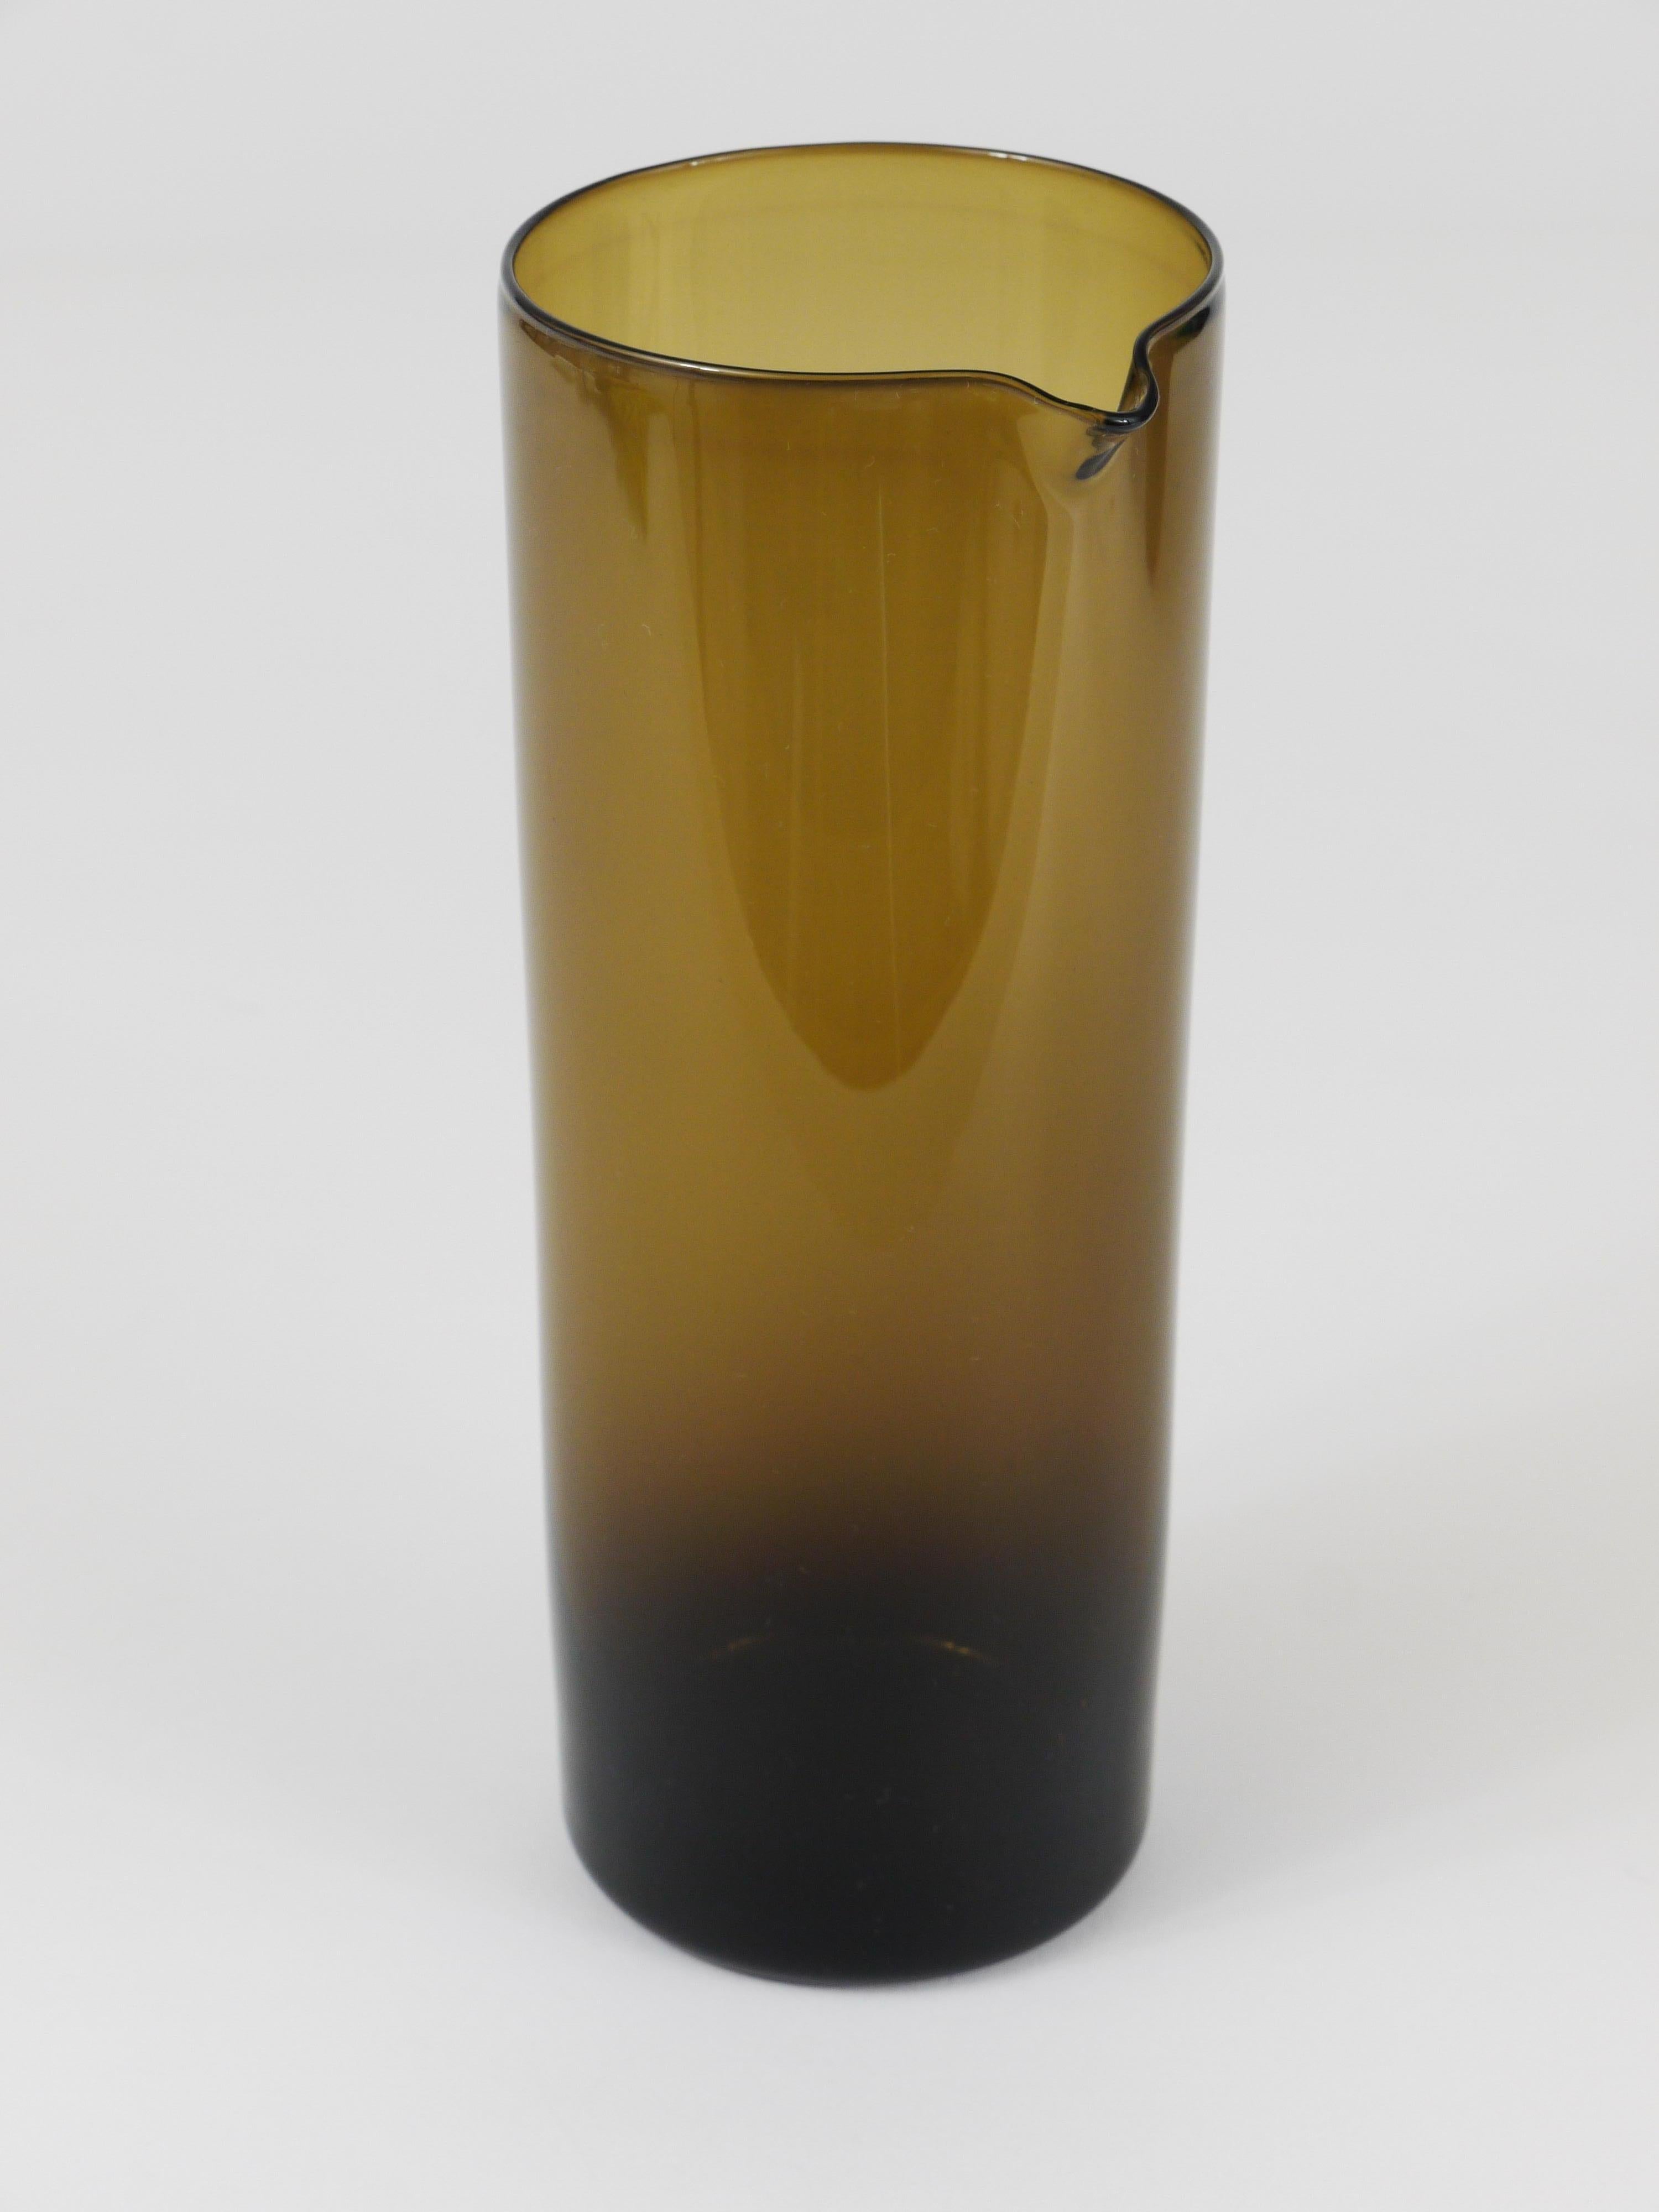 Purtilo Glass Pitcher Carafe by Kaj Franck for Nuutajärvi Notsjö, Finland, 1950s In Good Condition For Sale In Vienna, AT